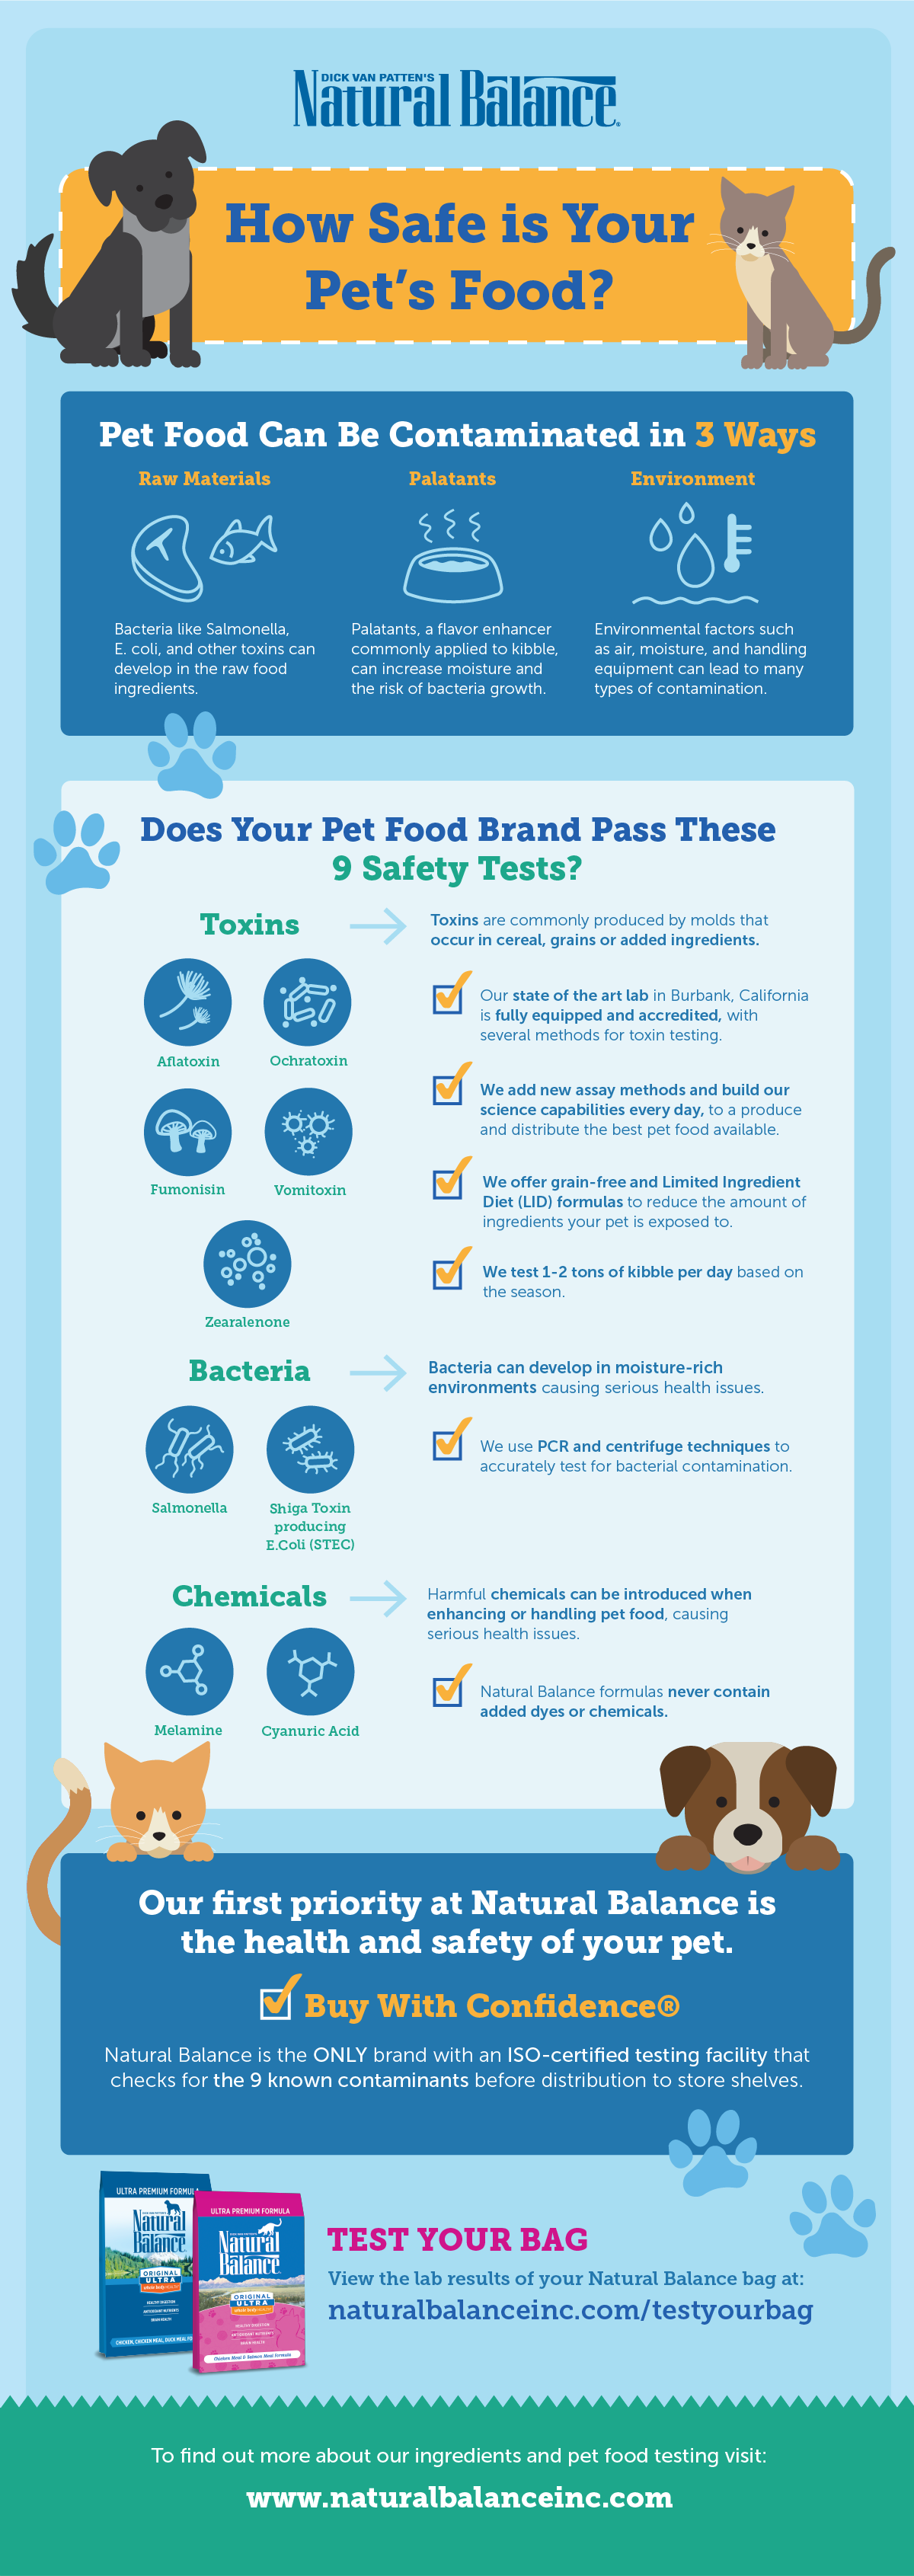 Want to learn more about pet food safety? Learn more about how safe your pet food is here!